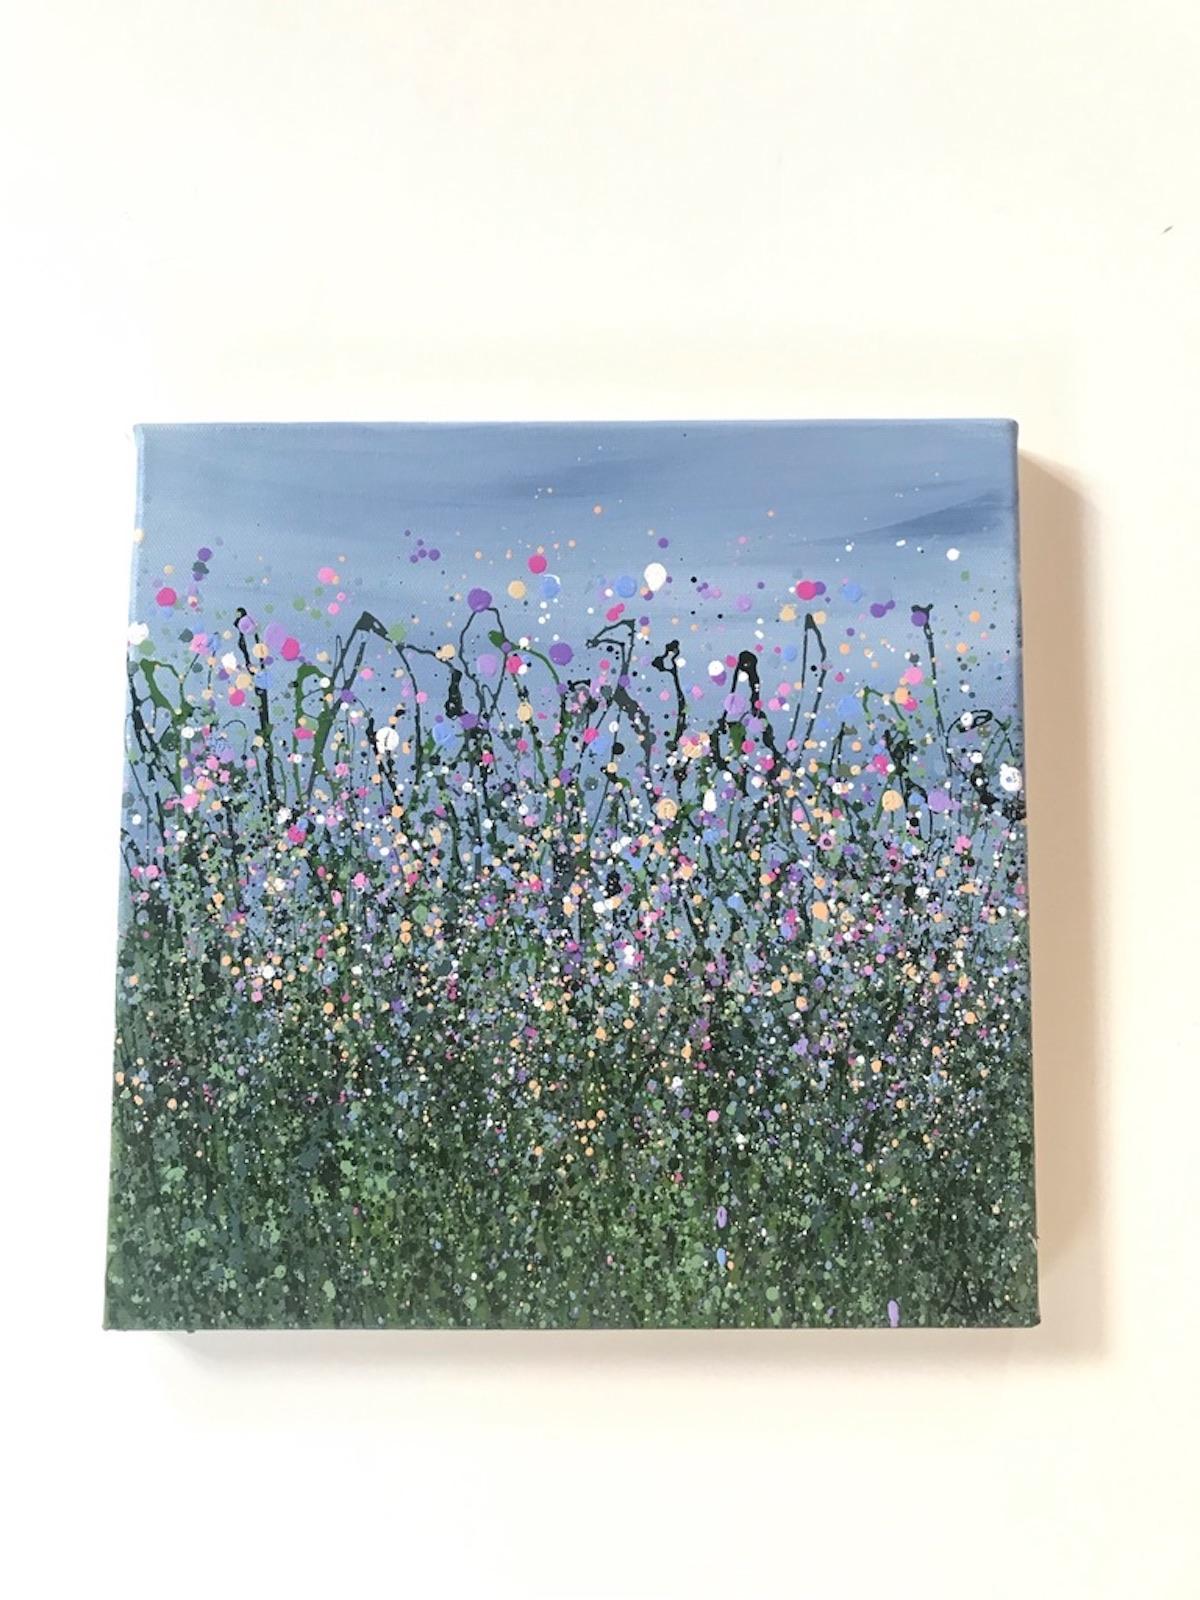 Muted Pink Meadows by Lucy Moore, Meadows, Floral, Nature, Landscape  For Sale 2